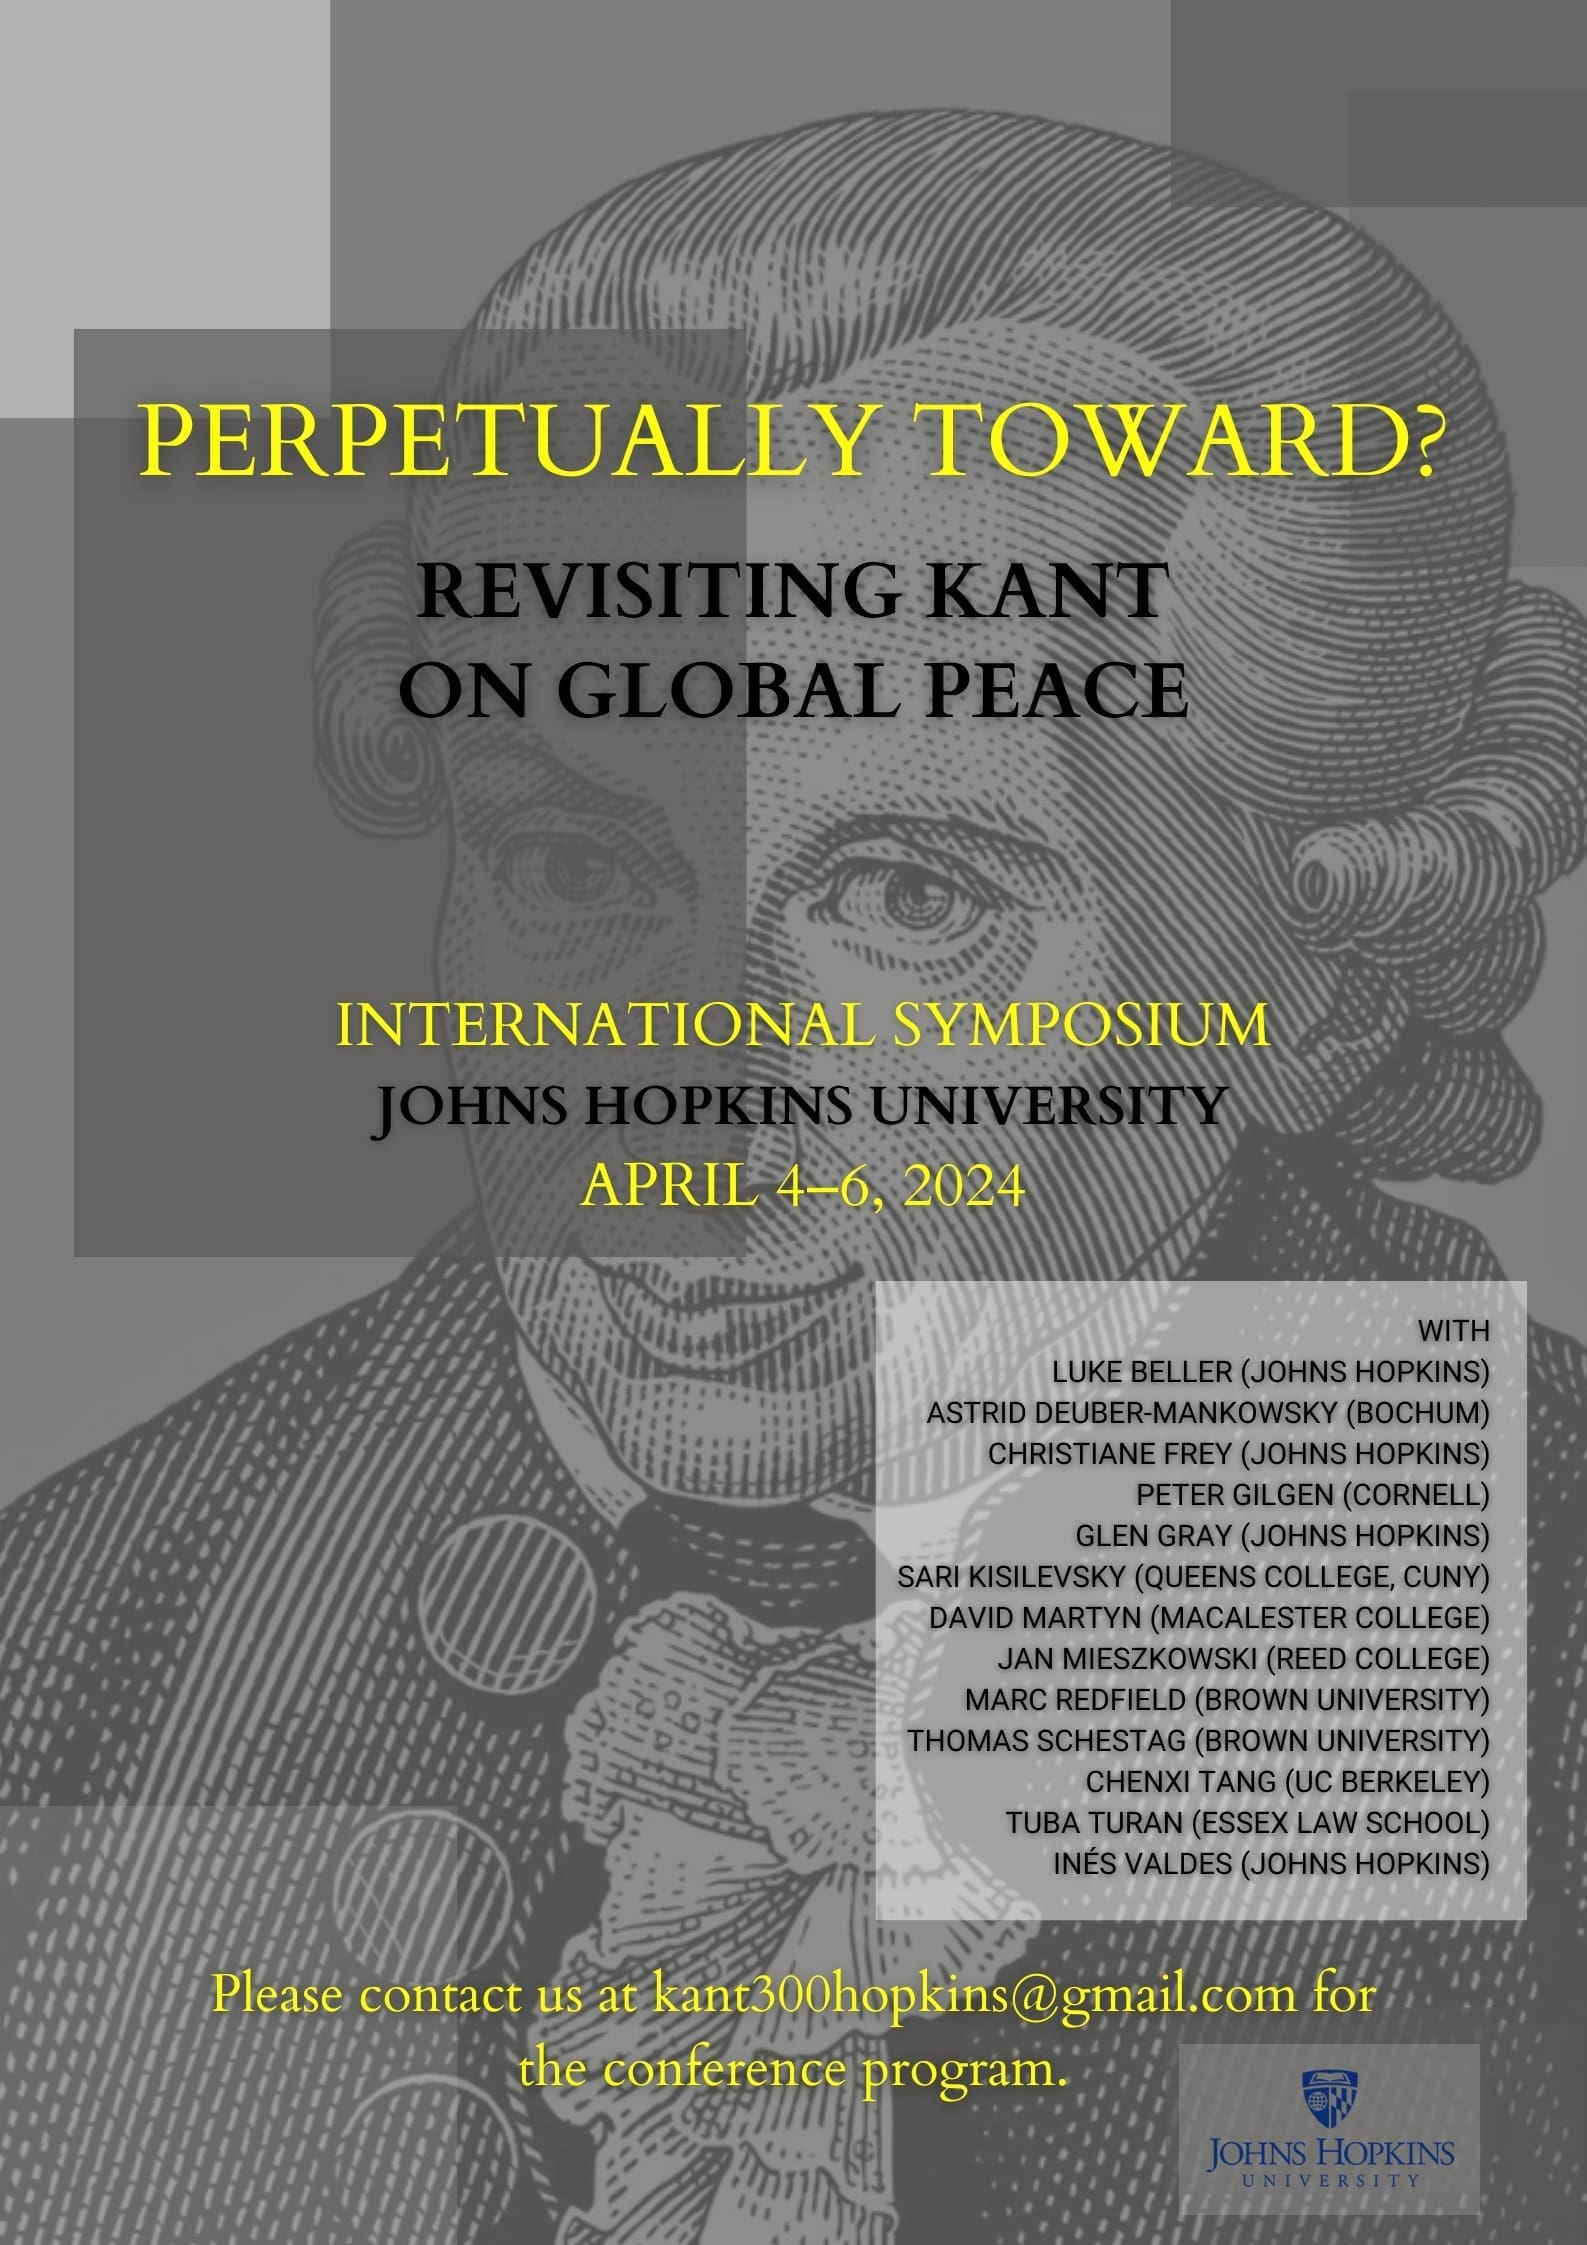 Poster for symposium with image of Immanuel Kant.